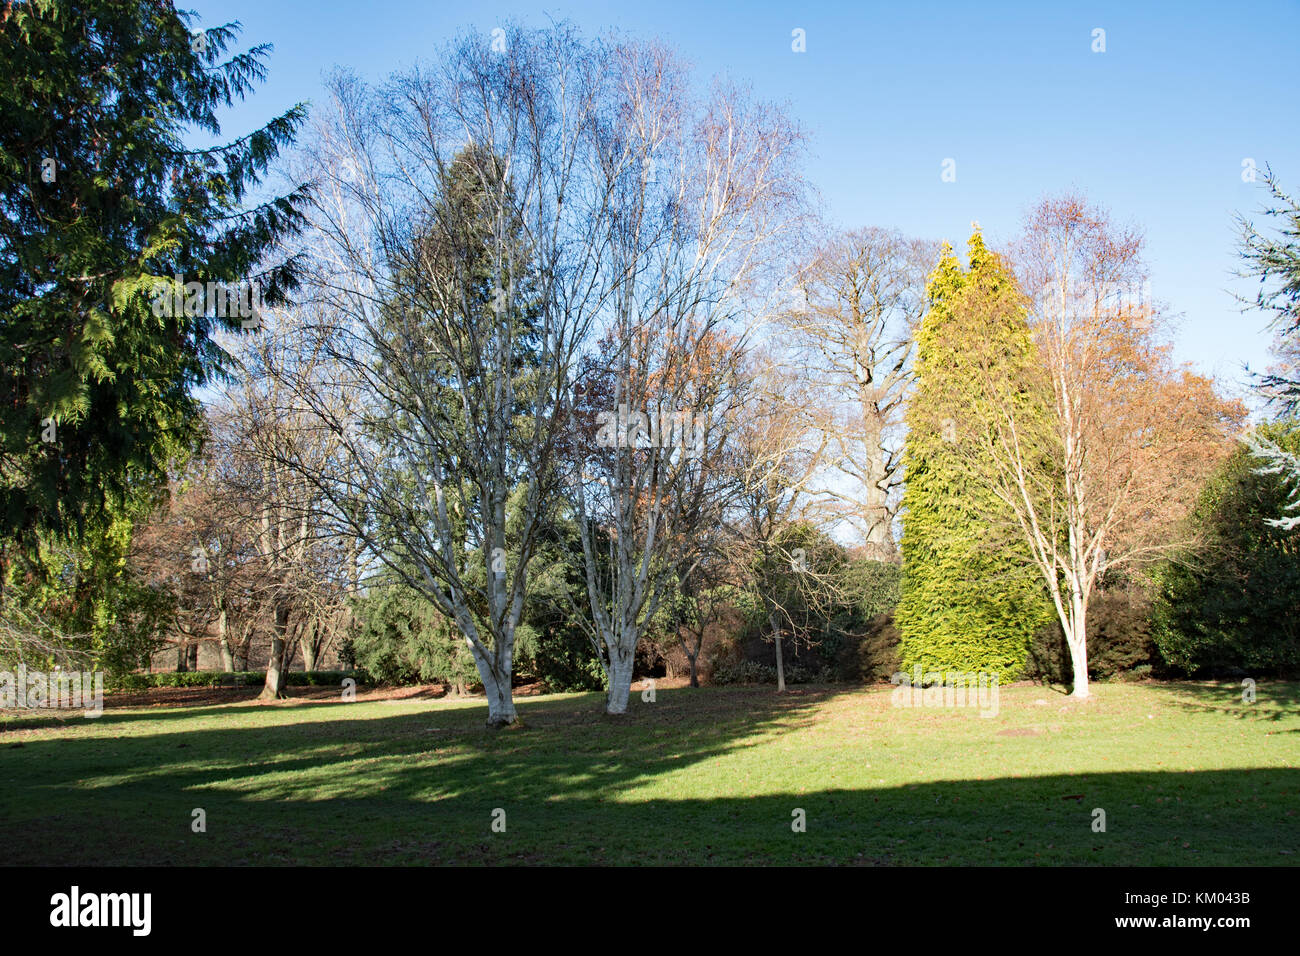 Mixed evergreens and deciduous trees at Langley Park Arboretum. Stock Photo